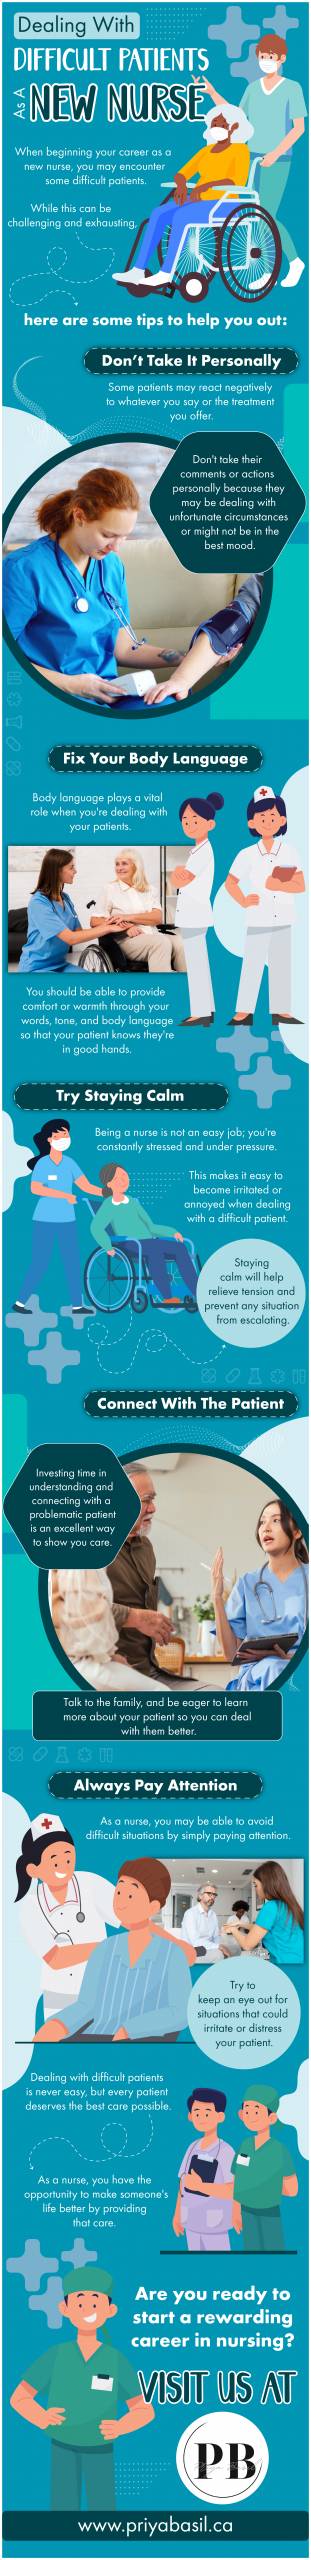 Dealing With Difficult Patients as A New Nurse - Infograph